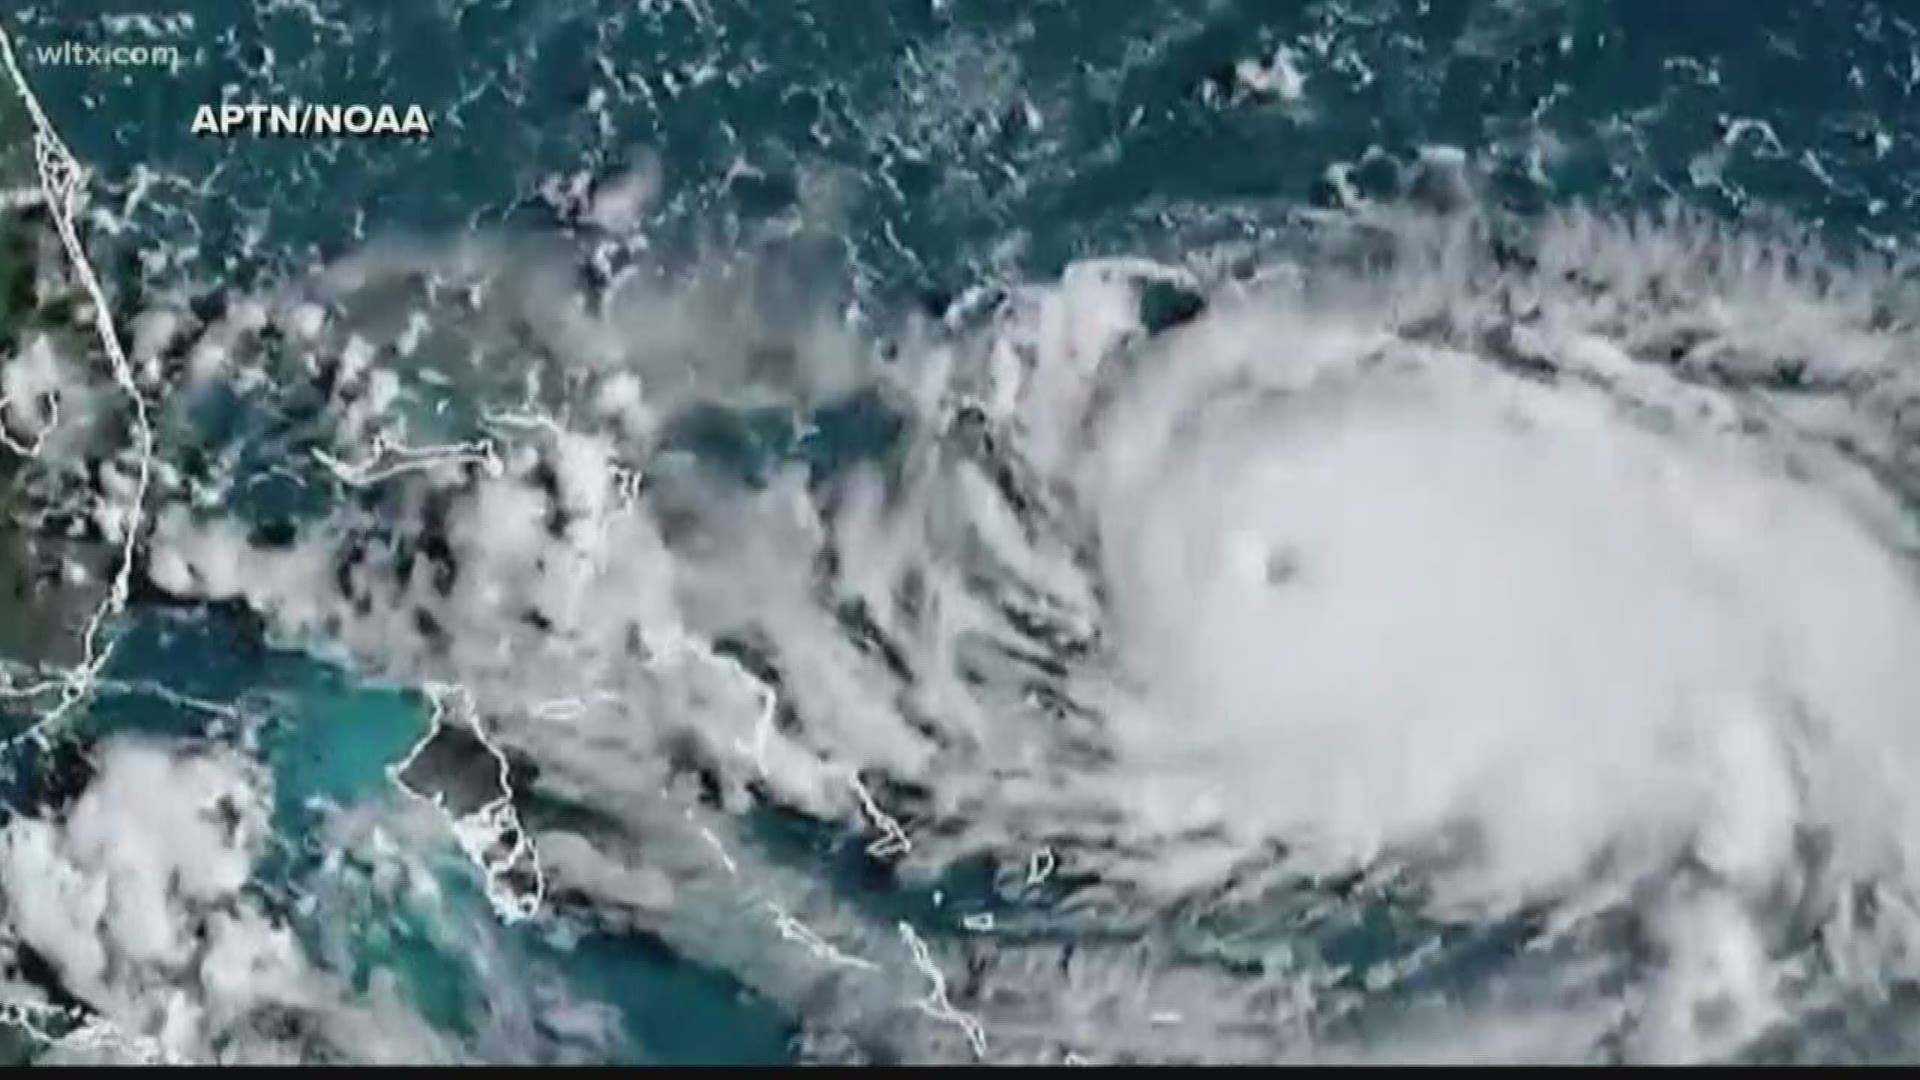 South Carolina Gov. Henry McMaster has declared a state of emergency, as the state gets ready for any potential problems from Hurricane Dorian. The governor issued the order at noon Saturday. A state of emergency does not mean a natural disaster is imminent. It just allows state agencies to begin coordinating and preparing for all possibly outcomes